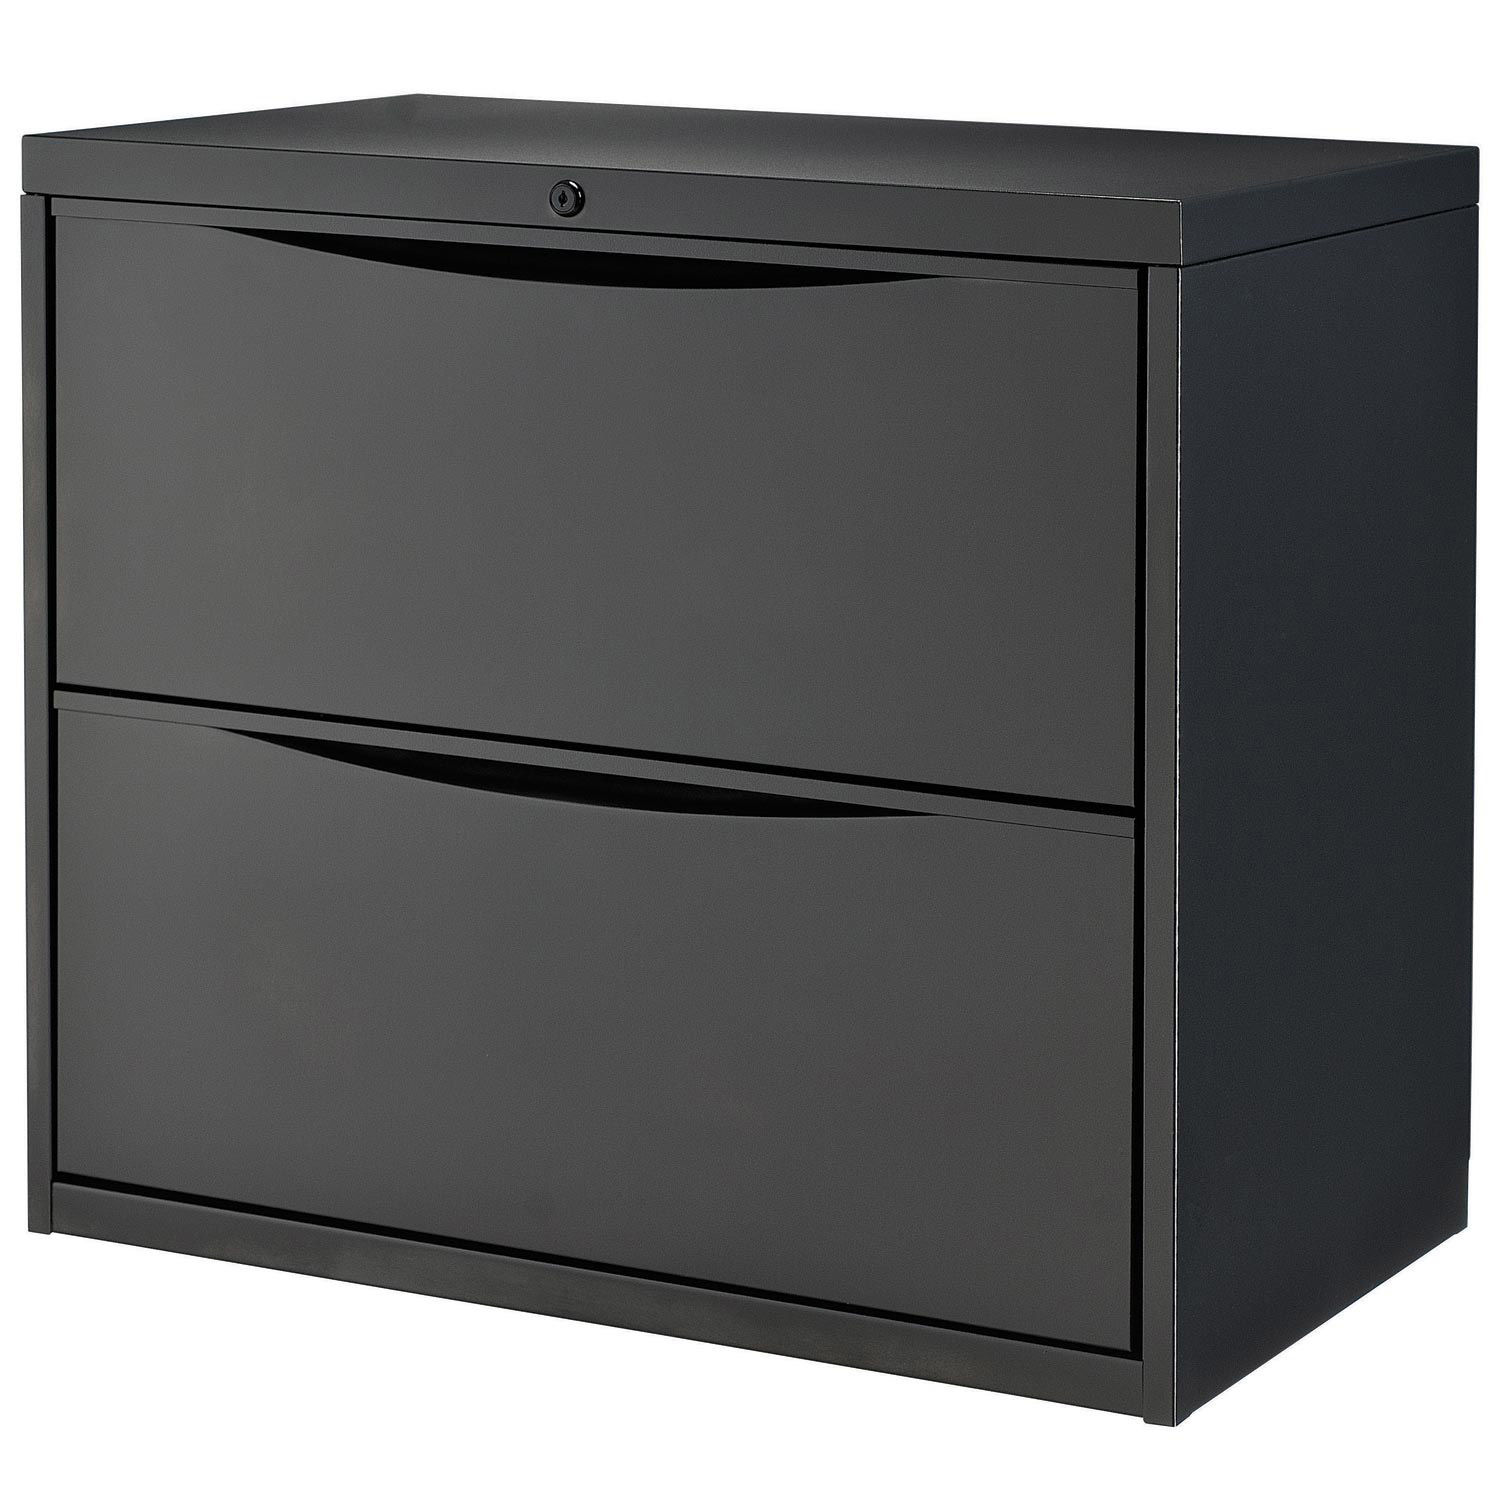 30"W Premium Lateral File Cabinet, 2 Drawer, Black - image 1 of 1